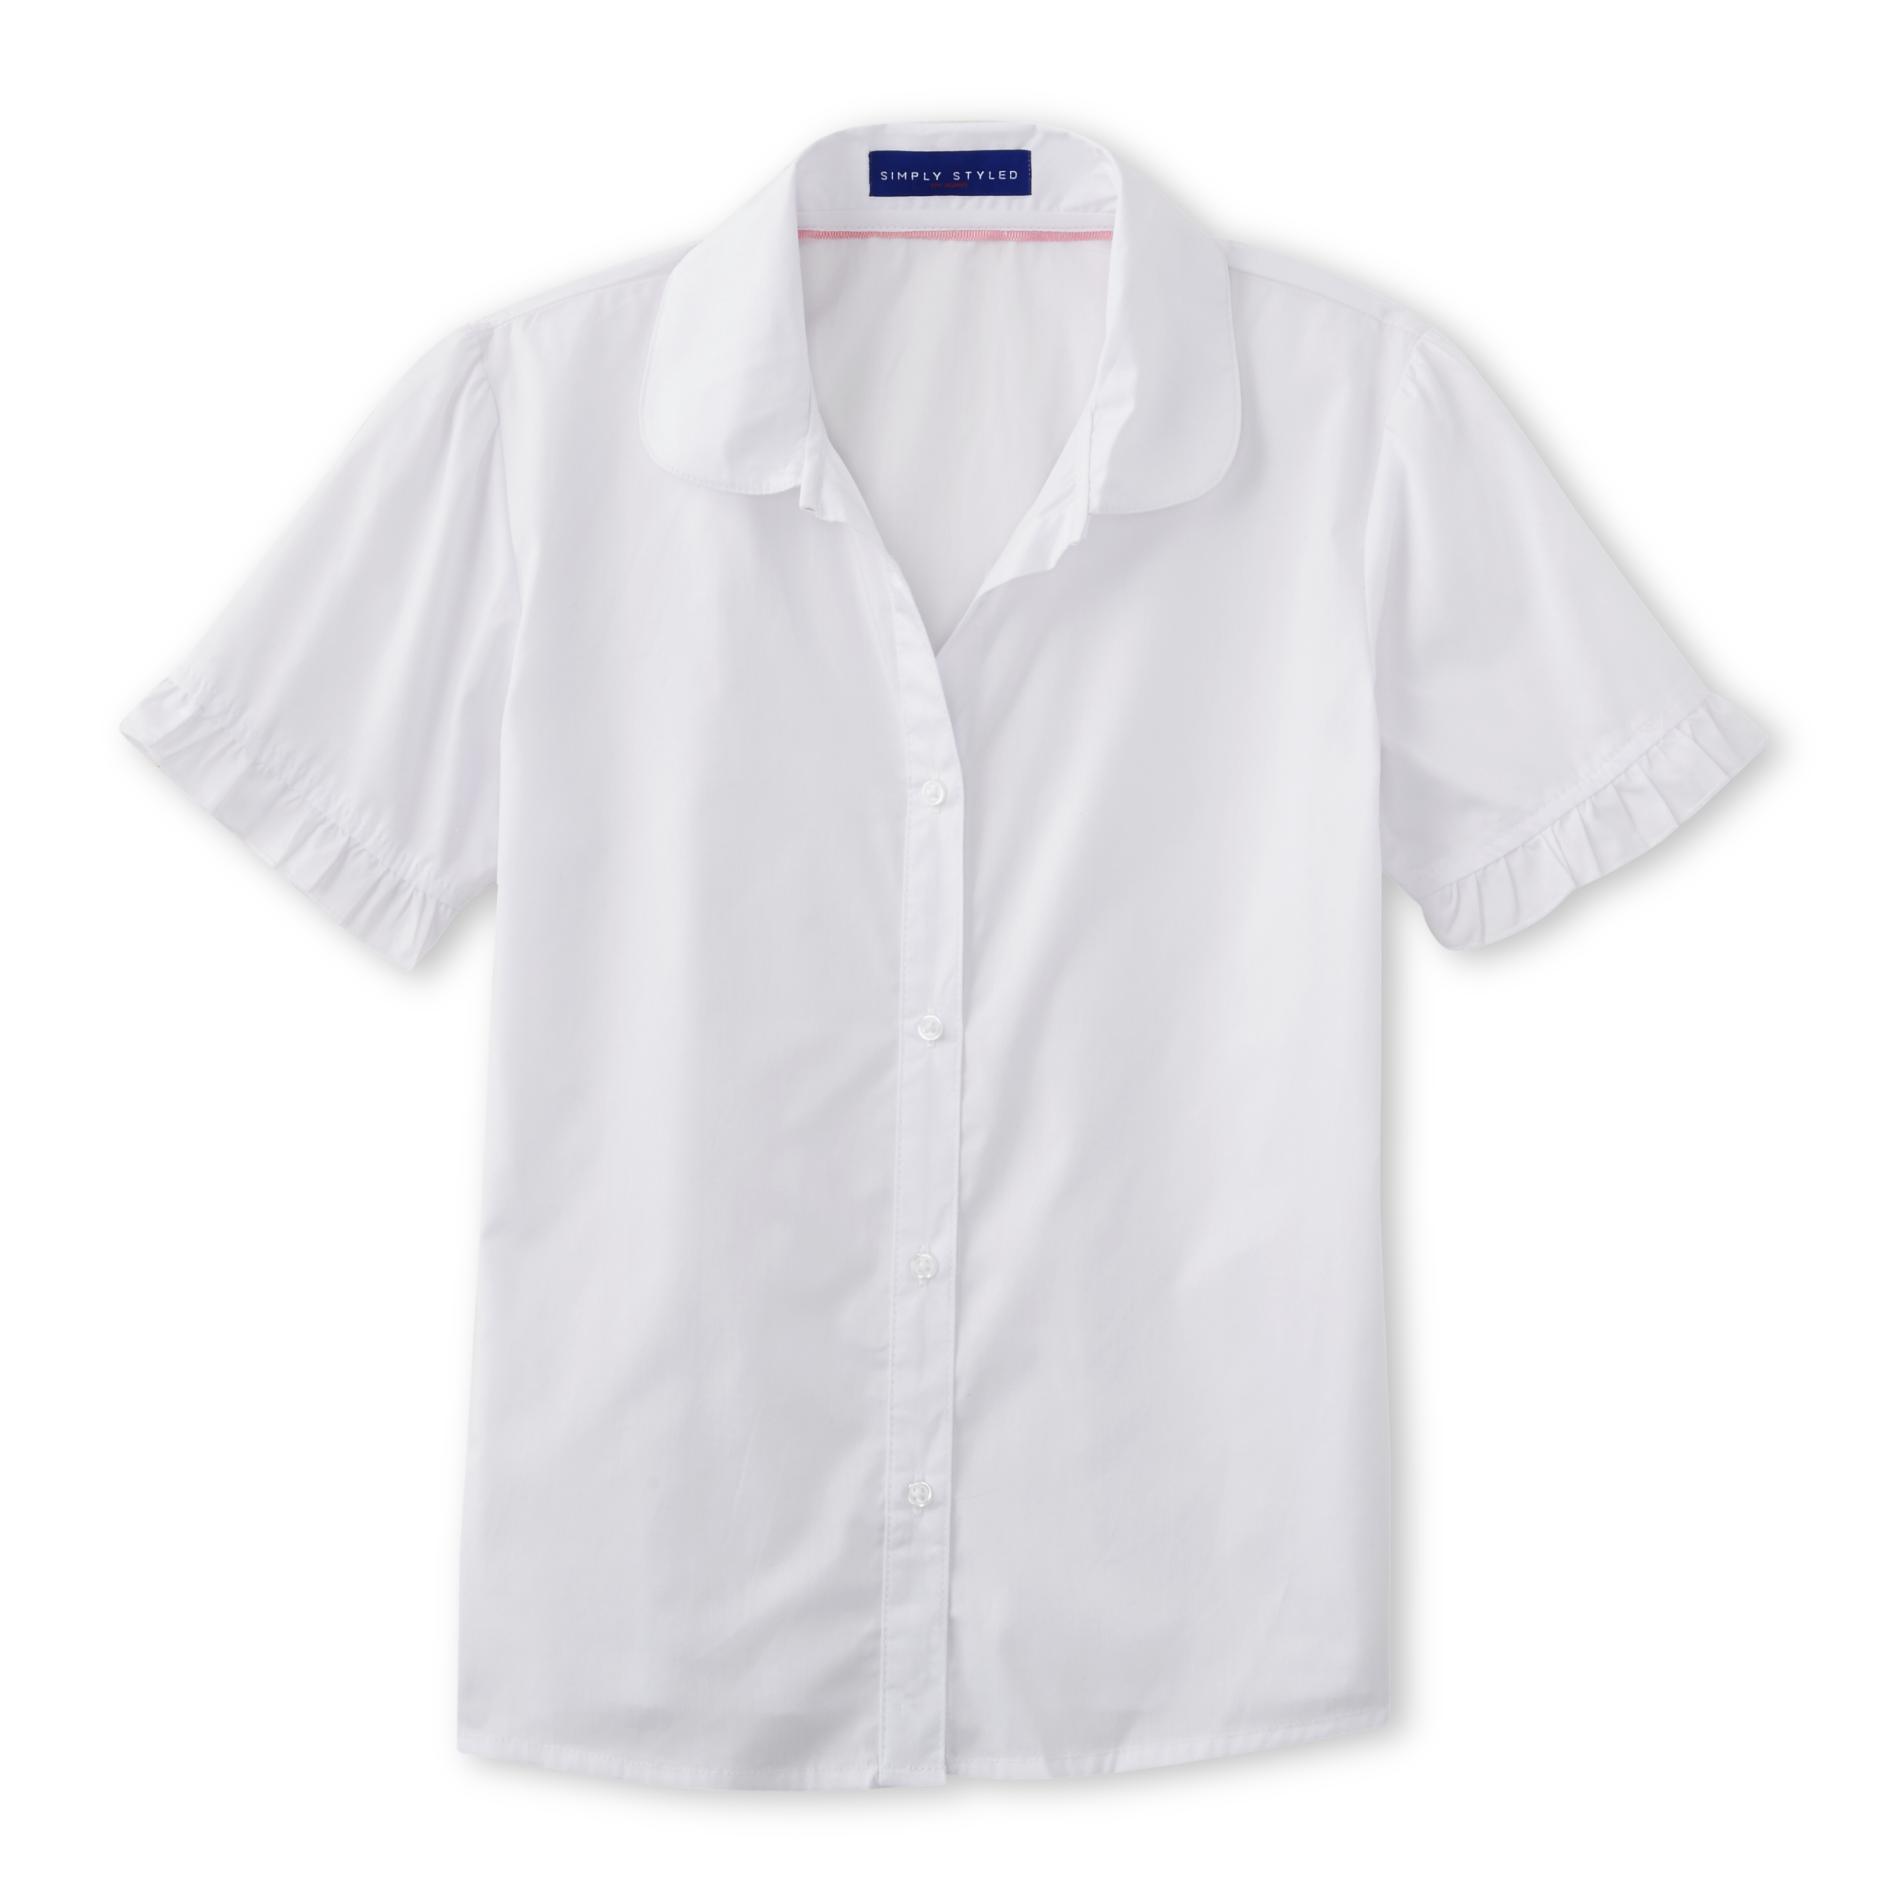 Simply Styled Girls' Short-Sleeve Blouse